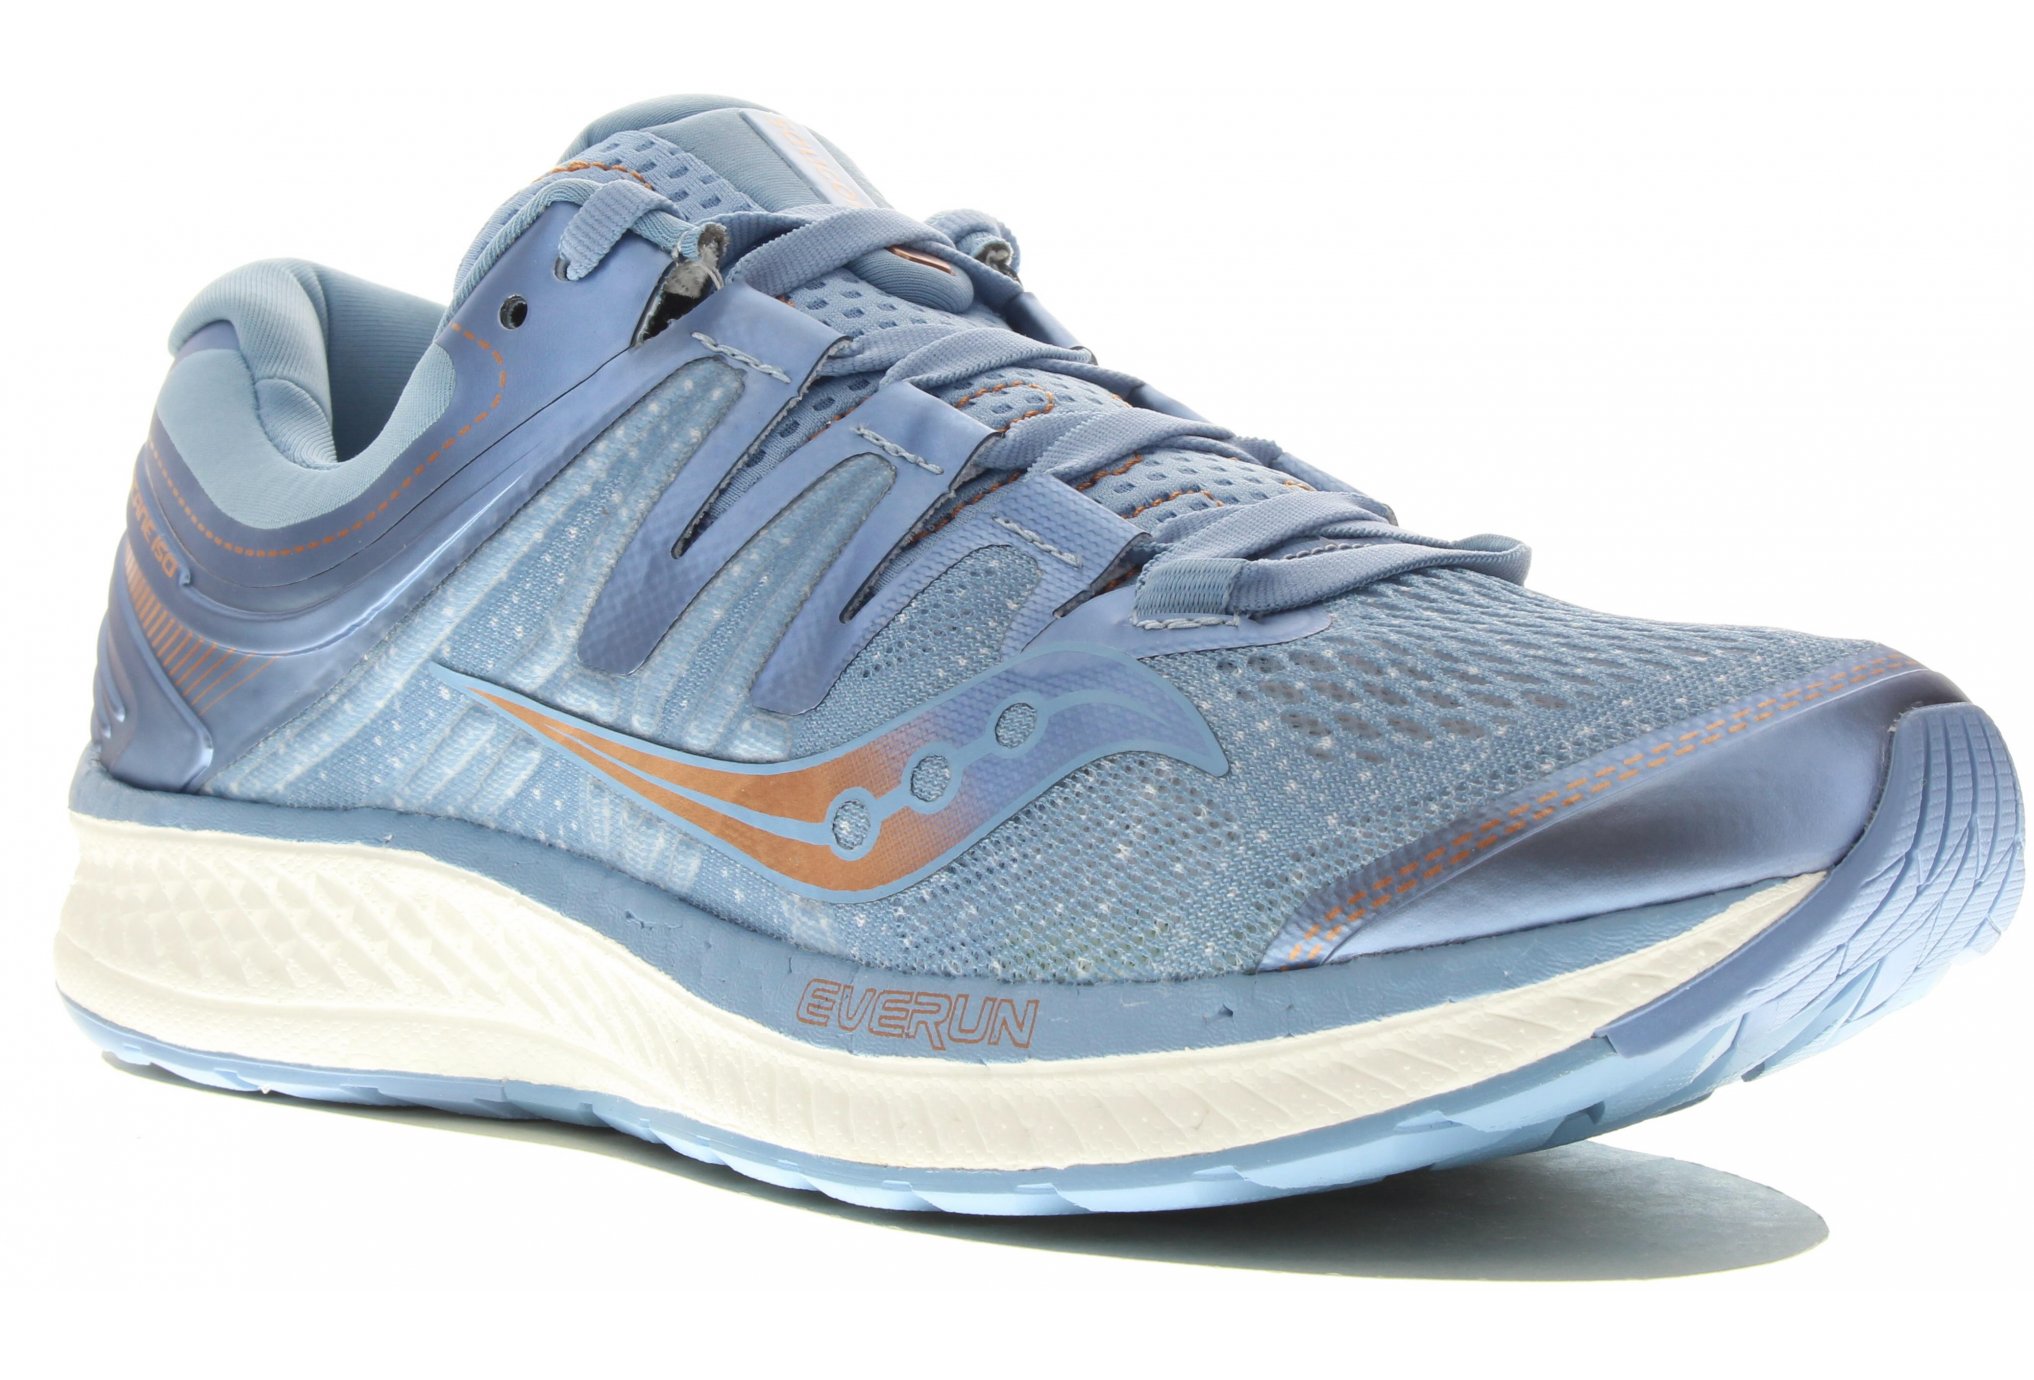 Saucony Hurricane iso 4 w dittique chaussures femme